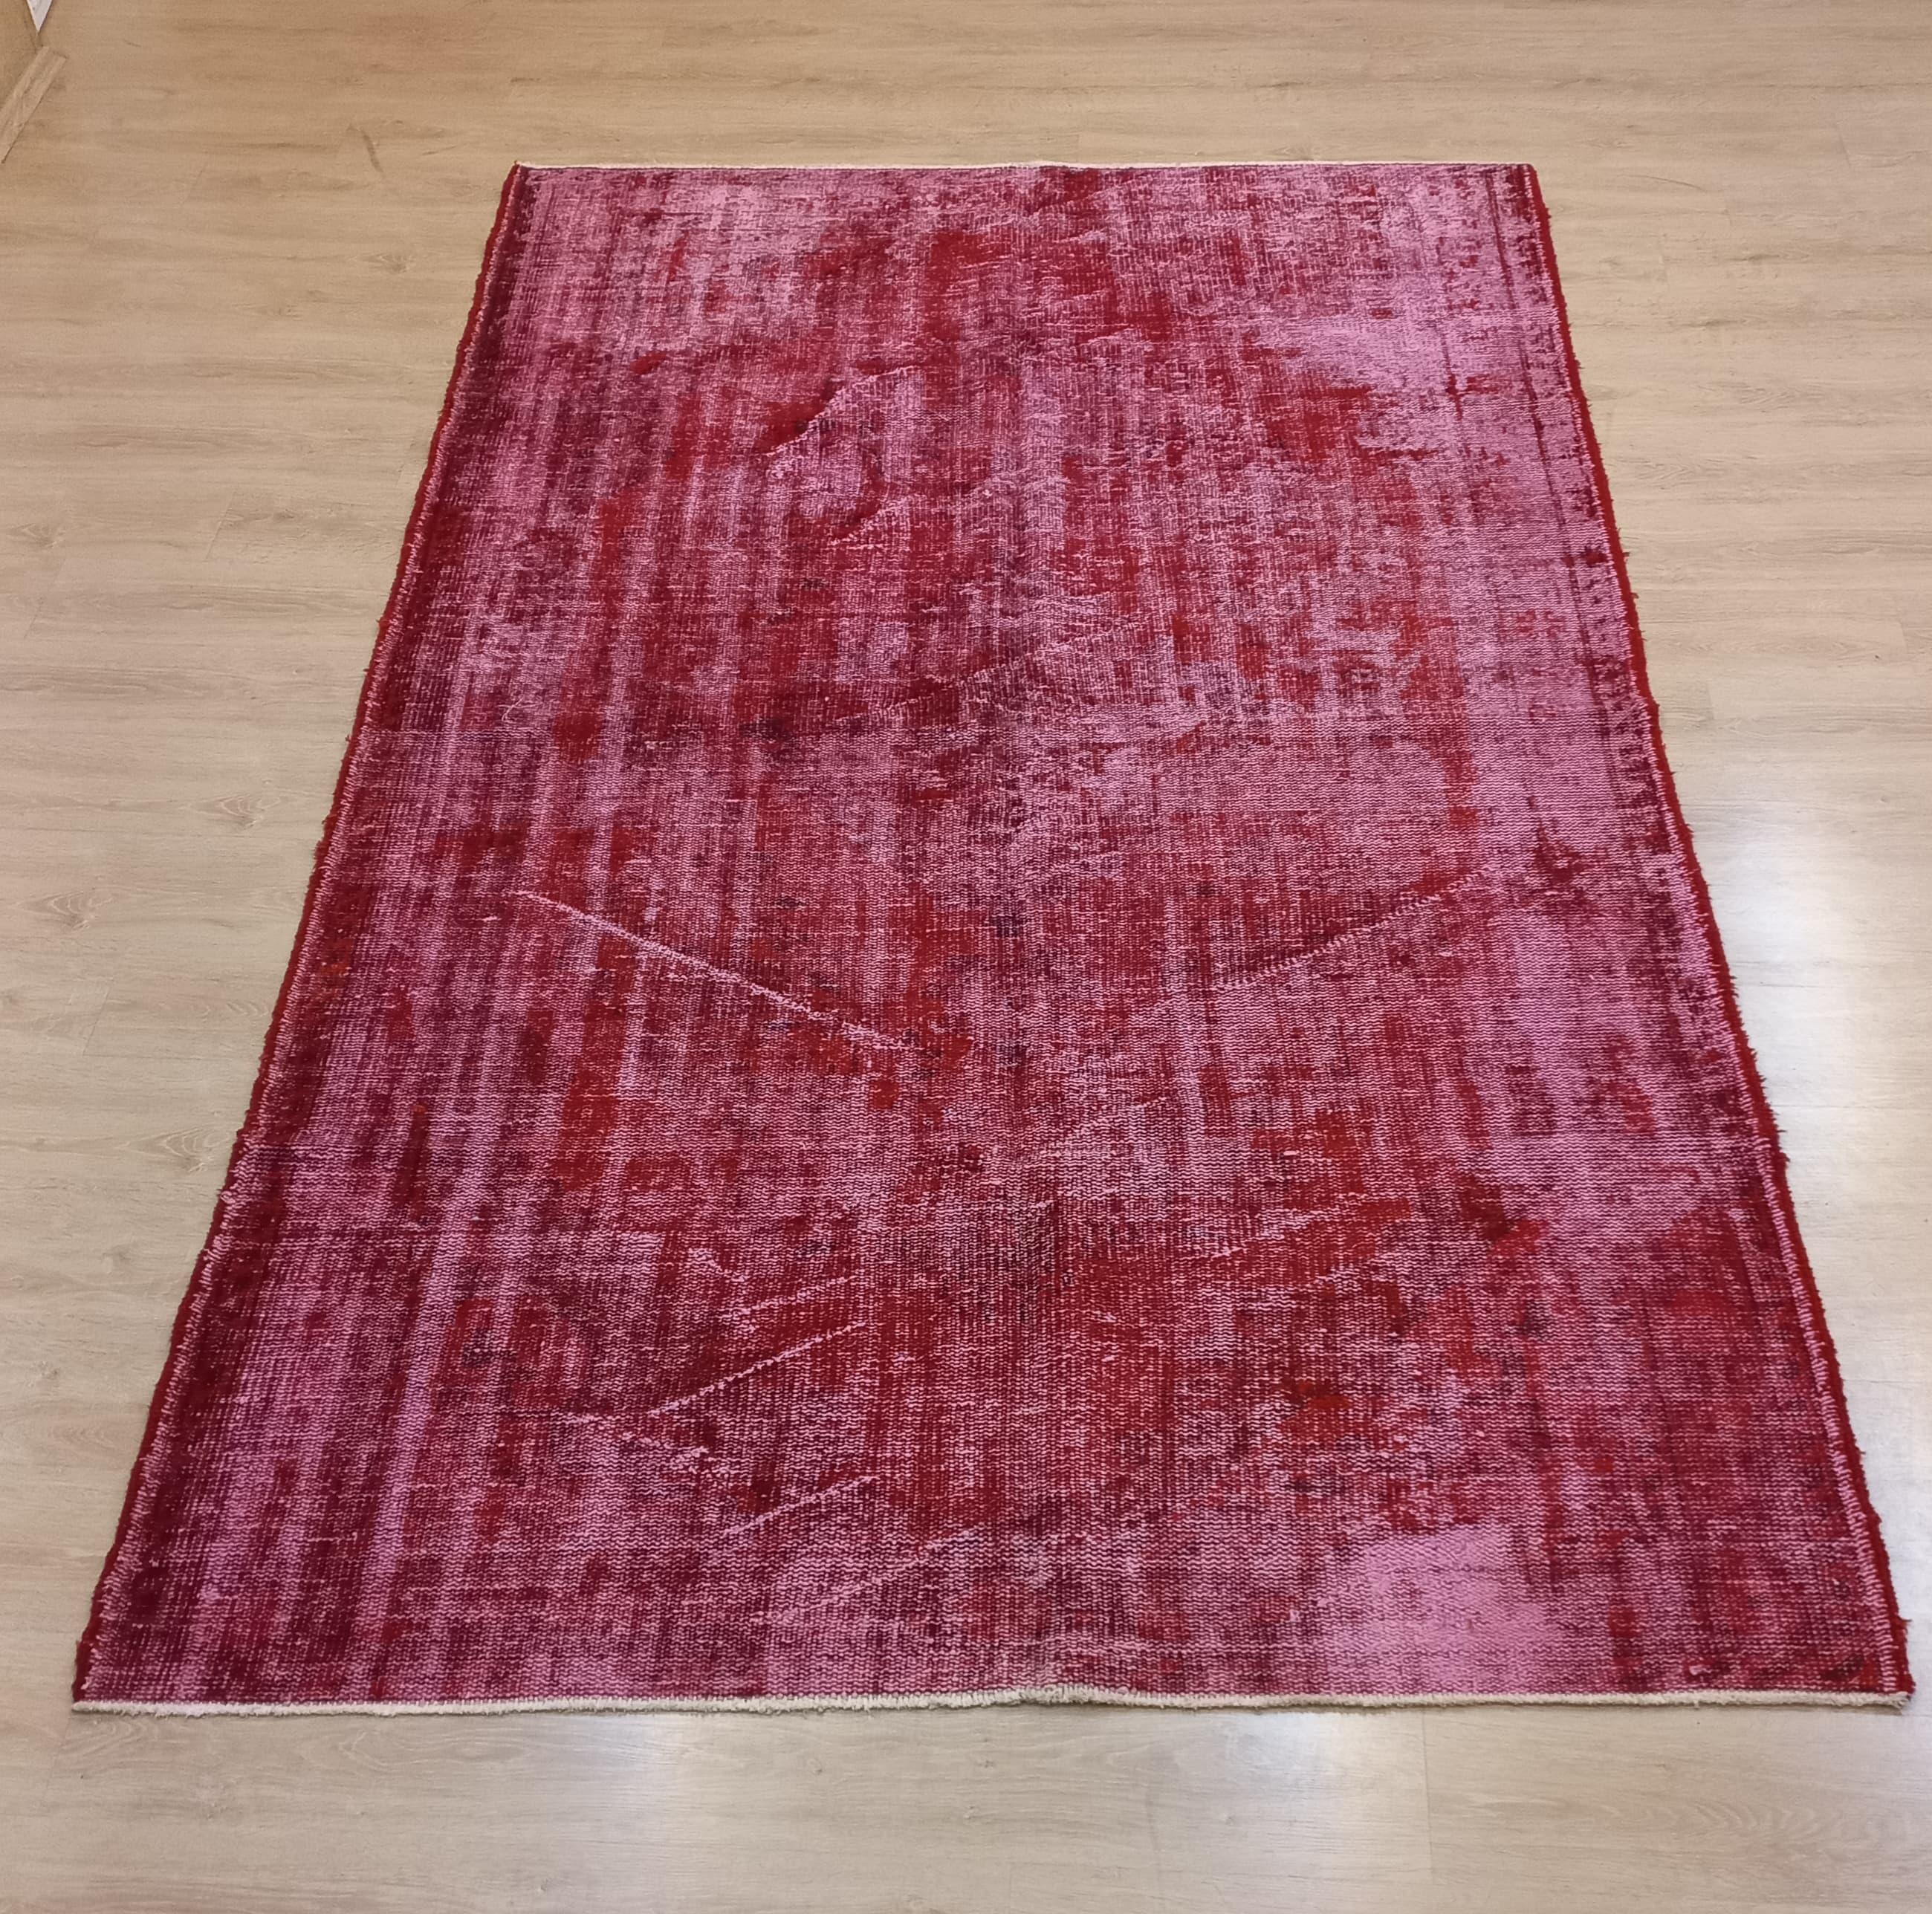 Mid-20th Century 5.8x9.6 Ft Plain Solid Red Handmade Turkish Area Rug with Shabby Chic Style For Sale